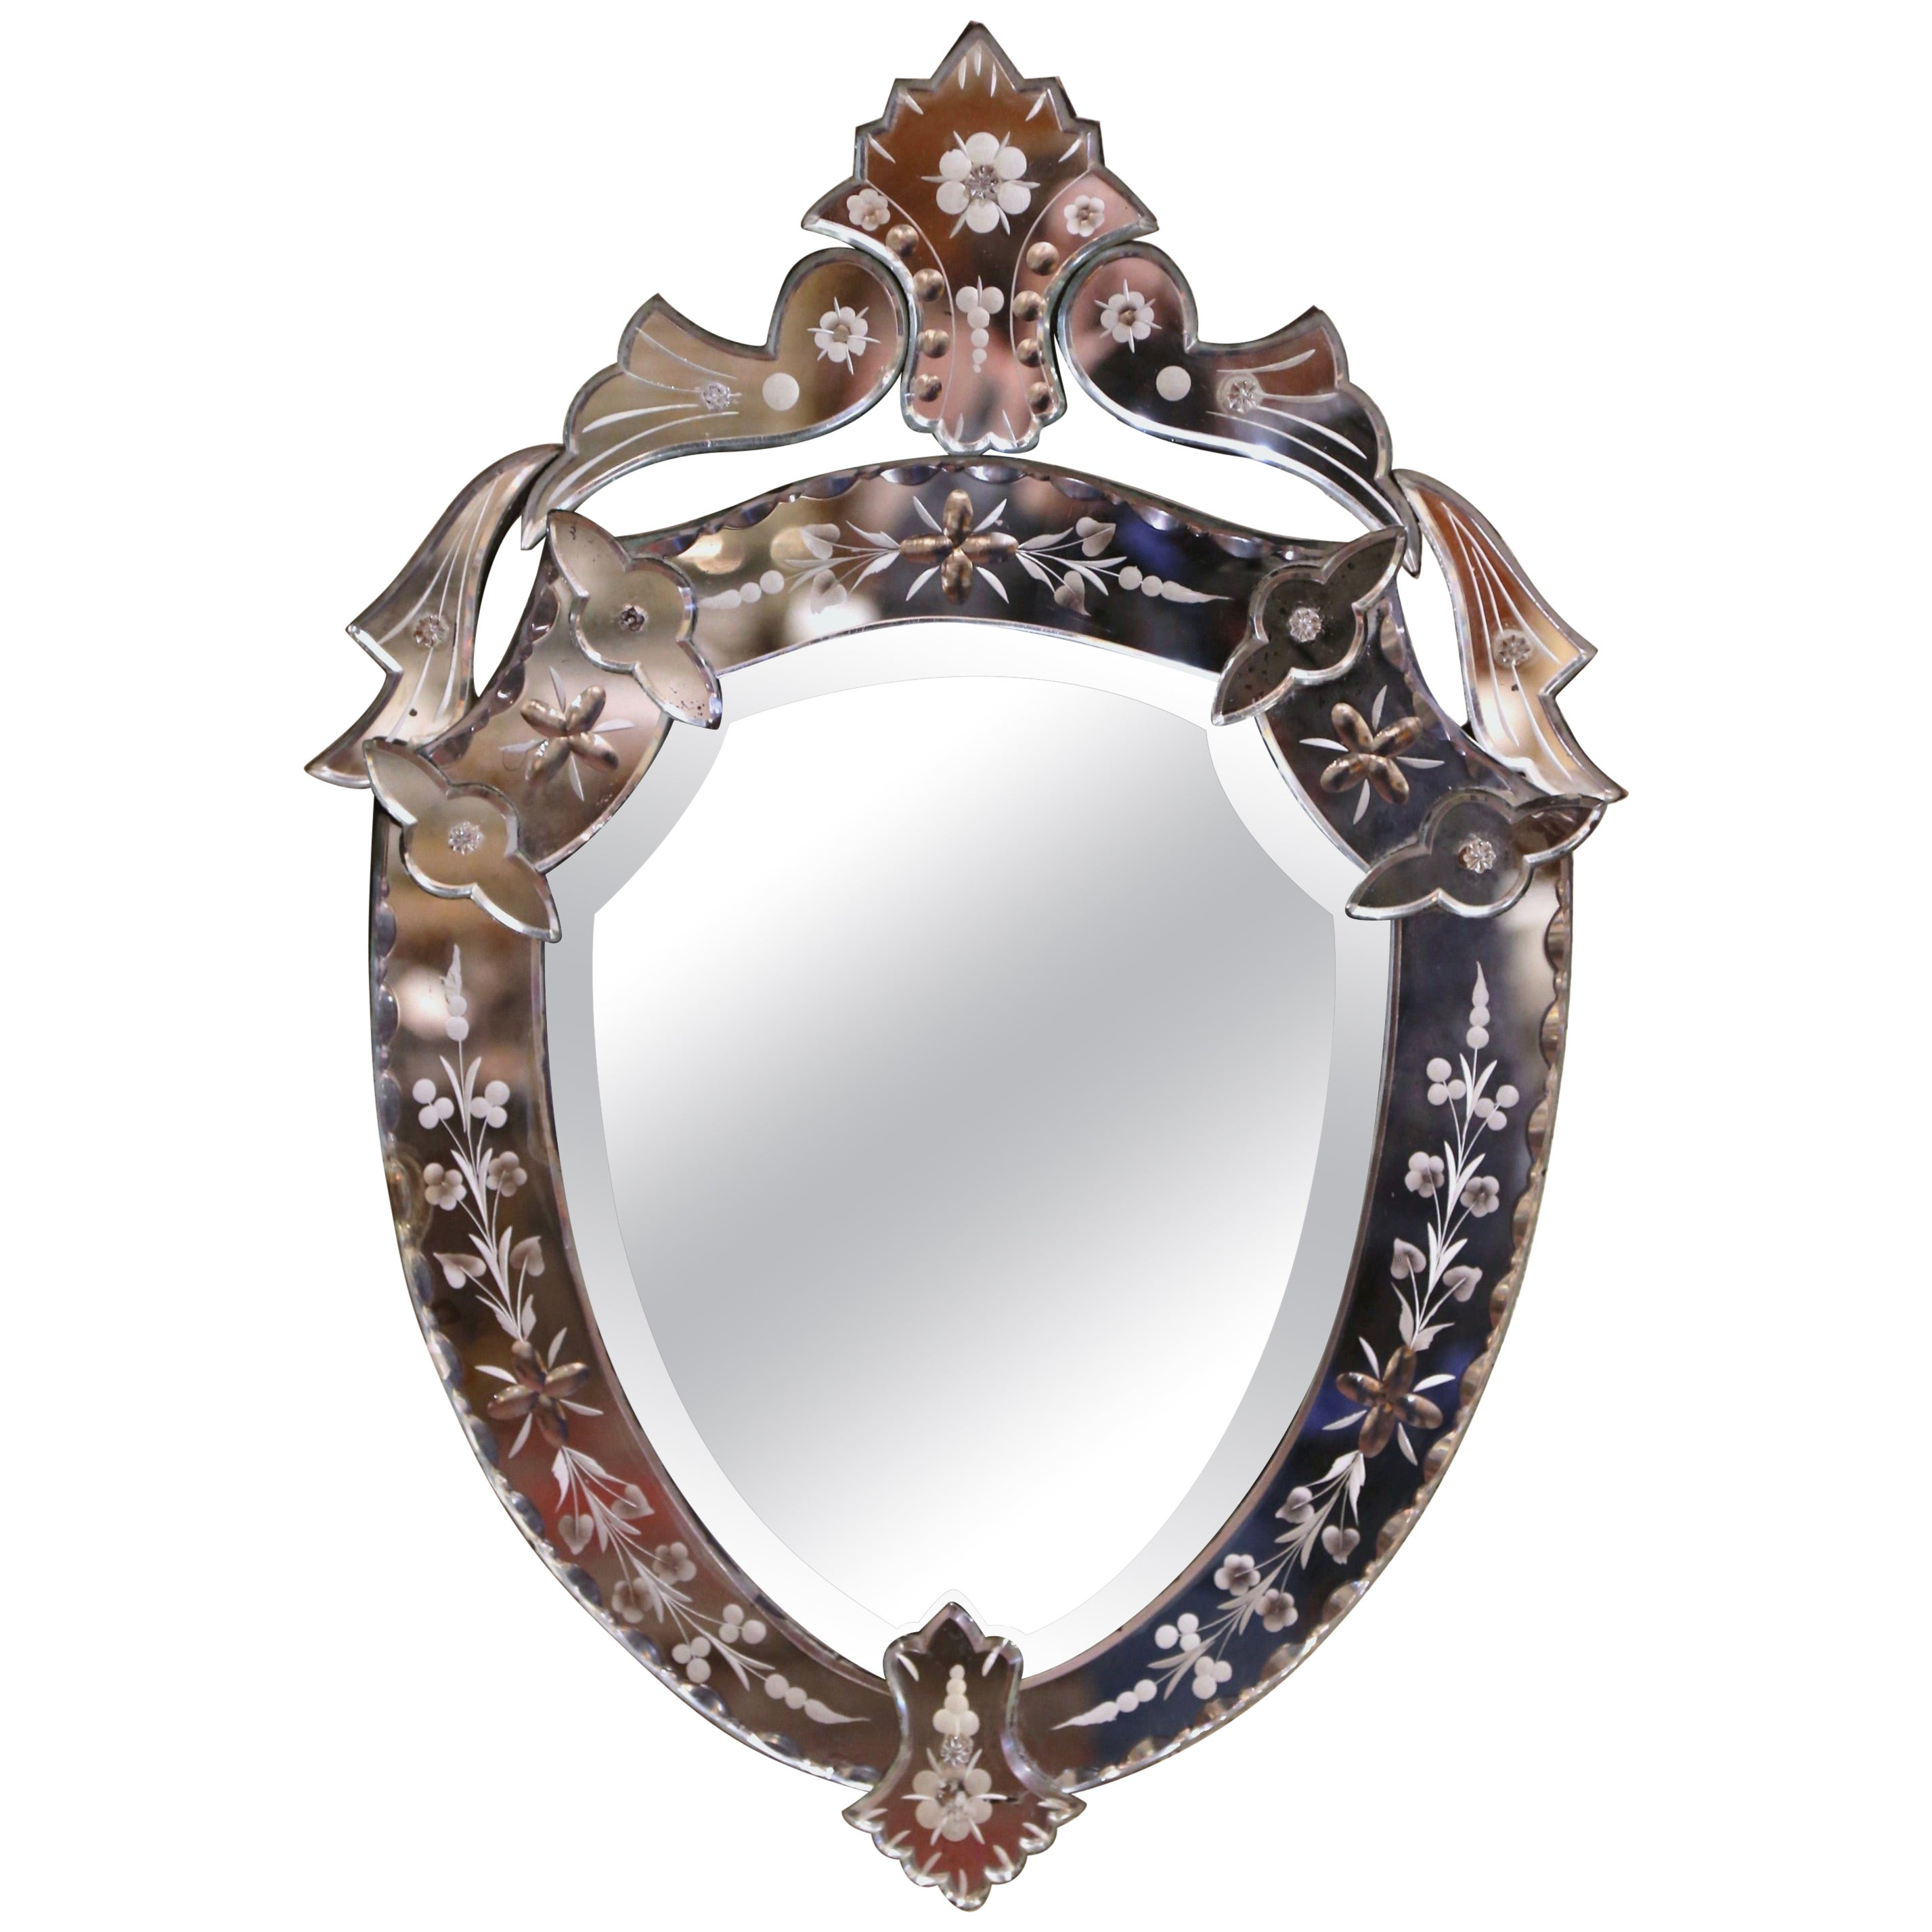 Midcentury Italian Venetian Beveled Shield Mirror with Painted Floral Etching For Sale